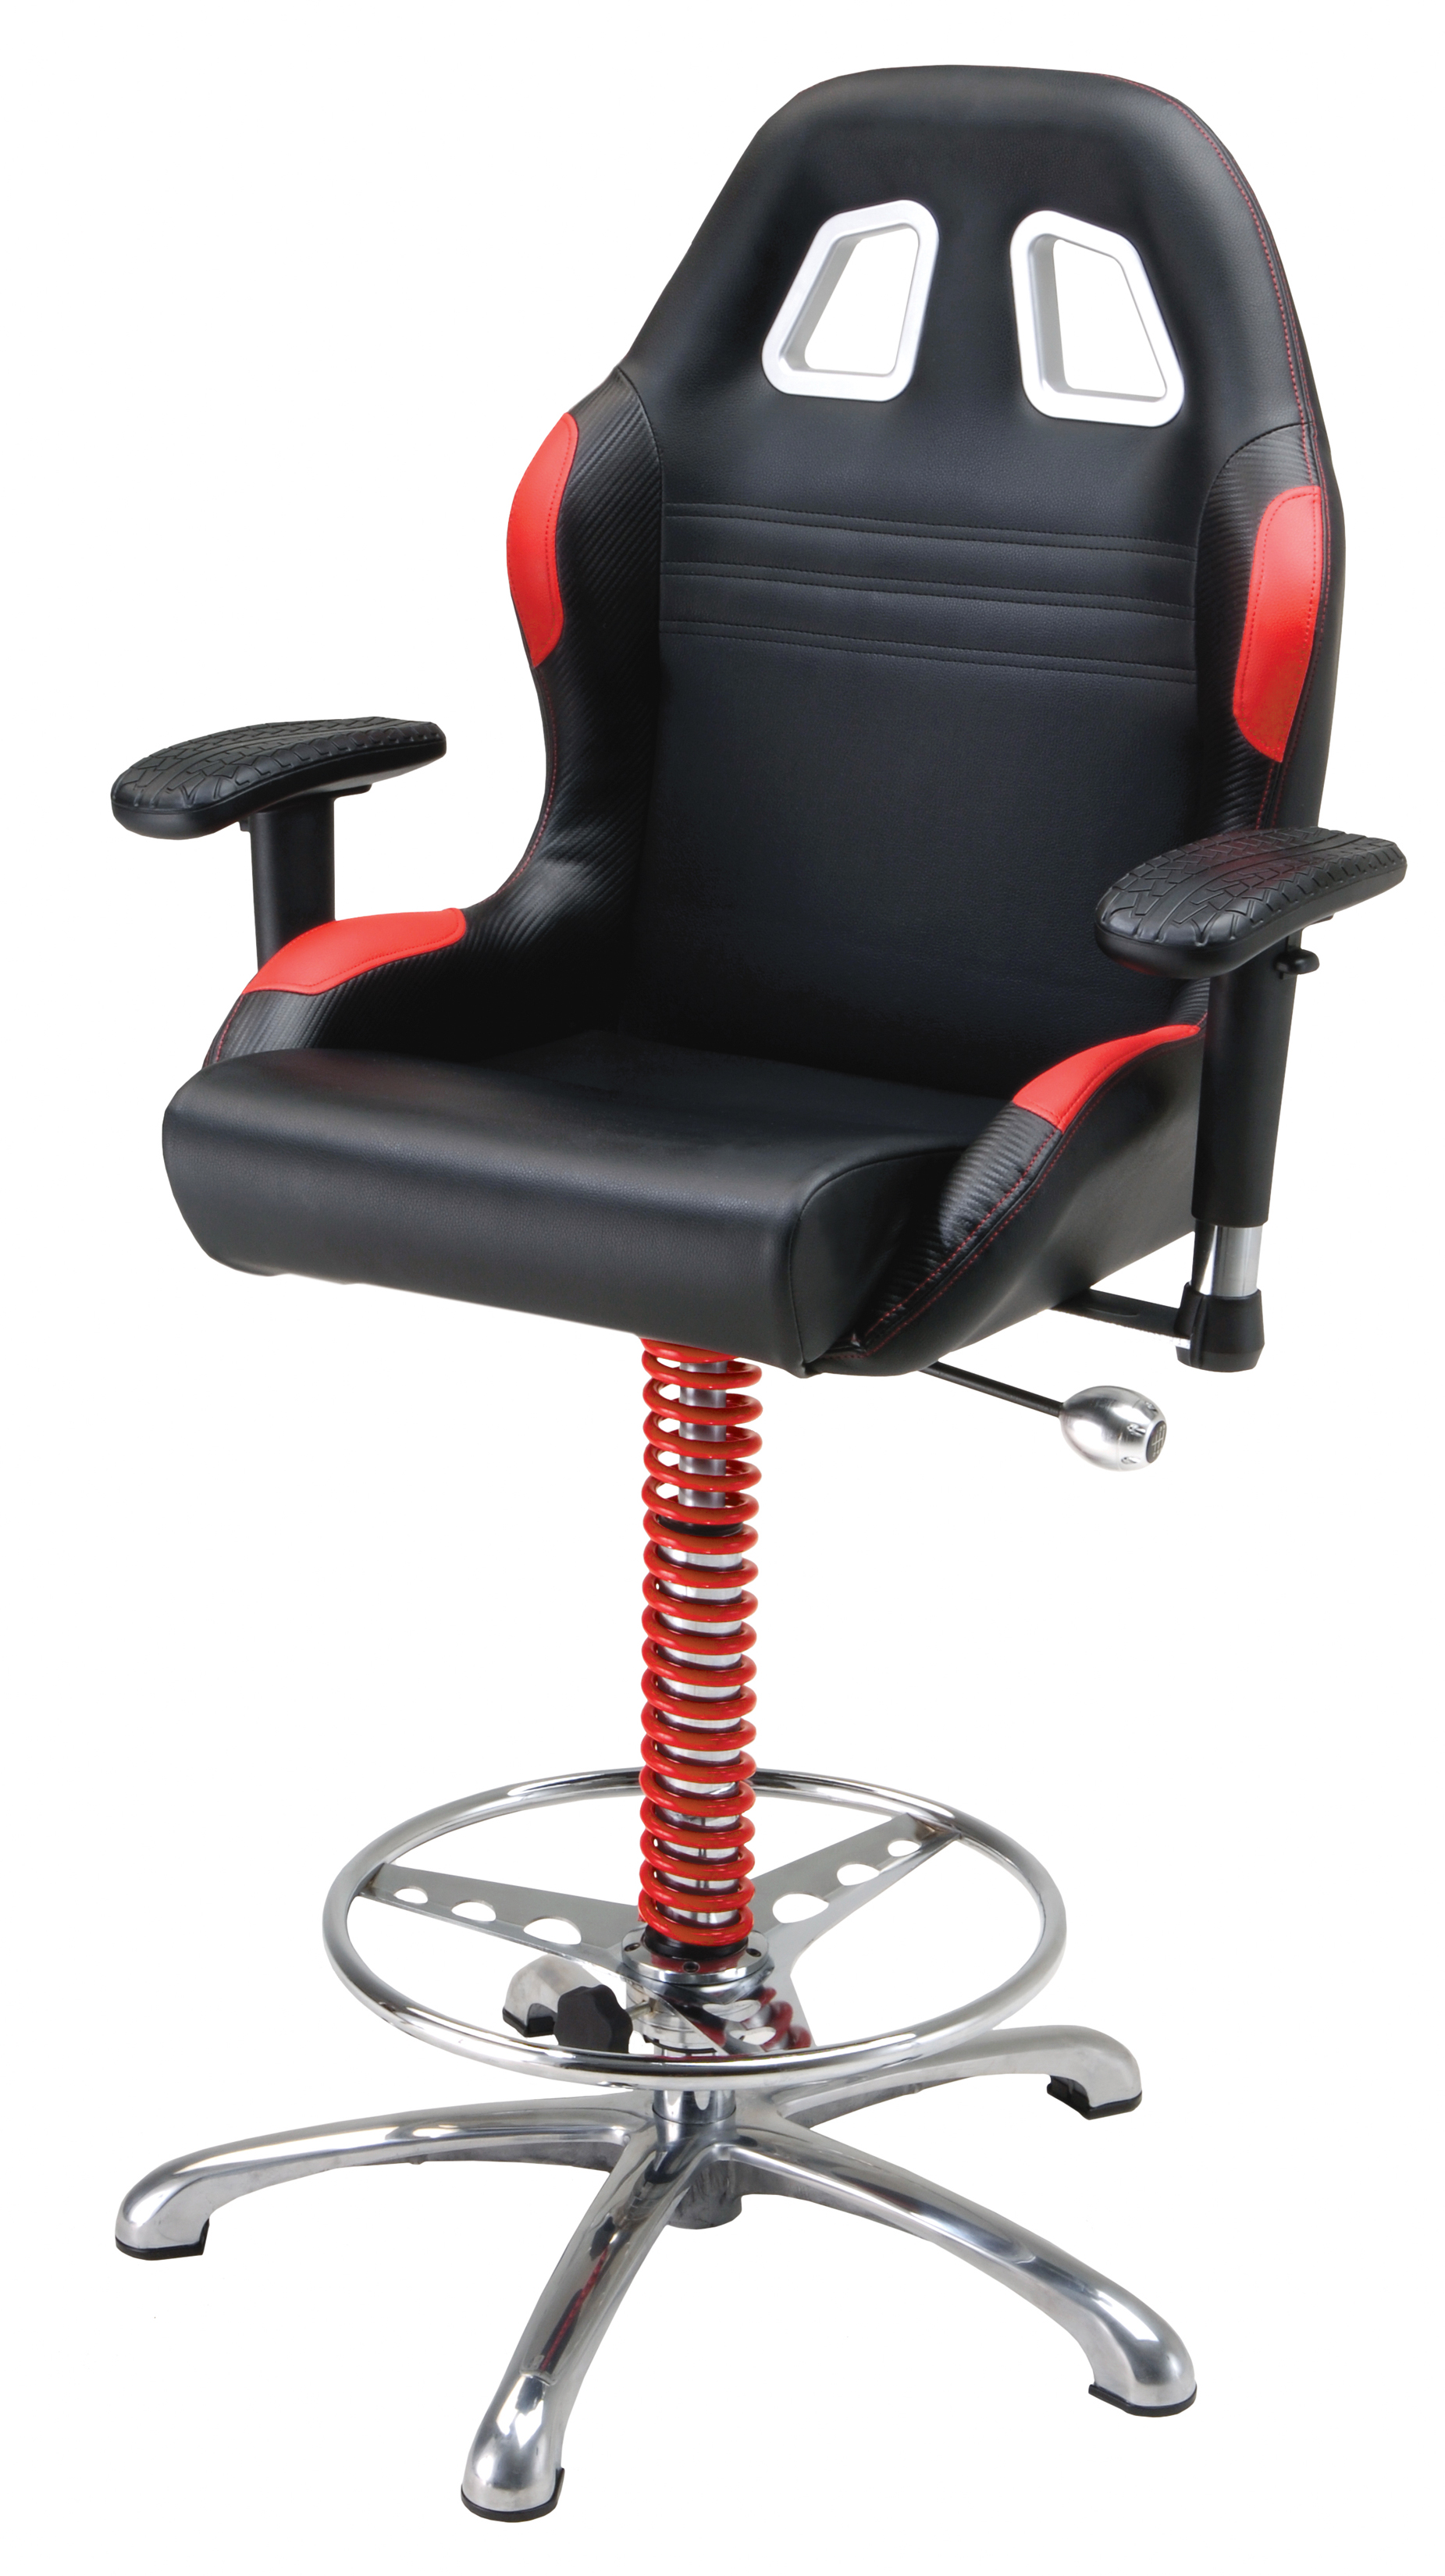 Intro-Tech Automotive, Pitstop Furniture, BC6000R Chief Chair Red, Bar Chair